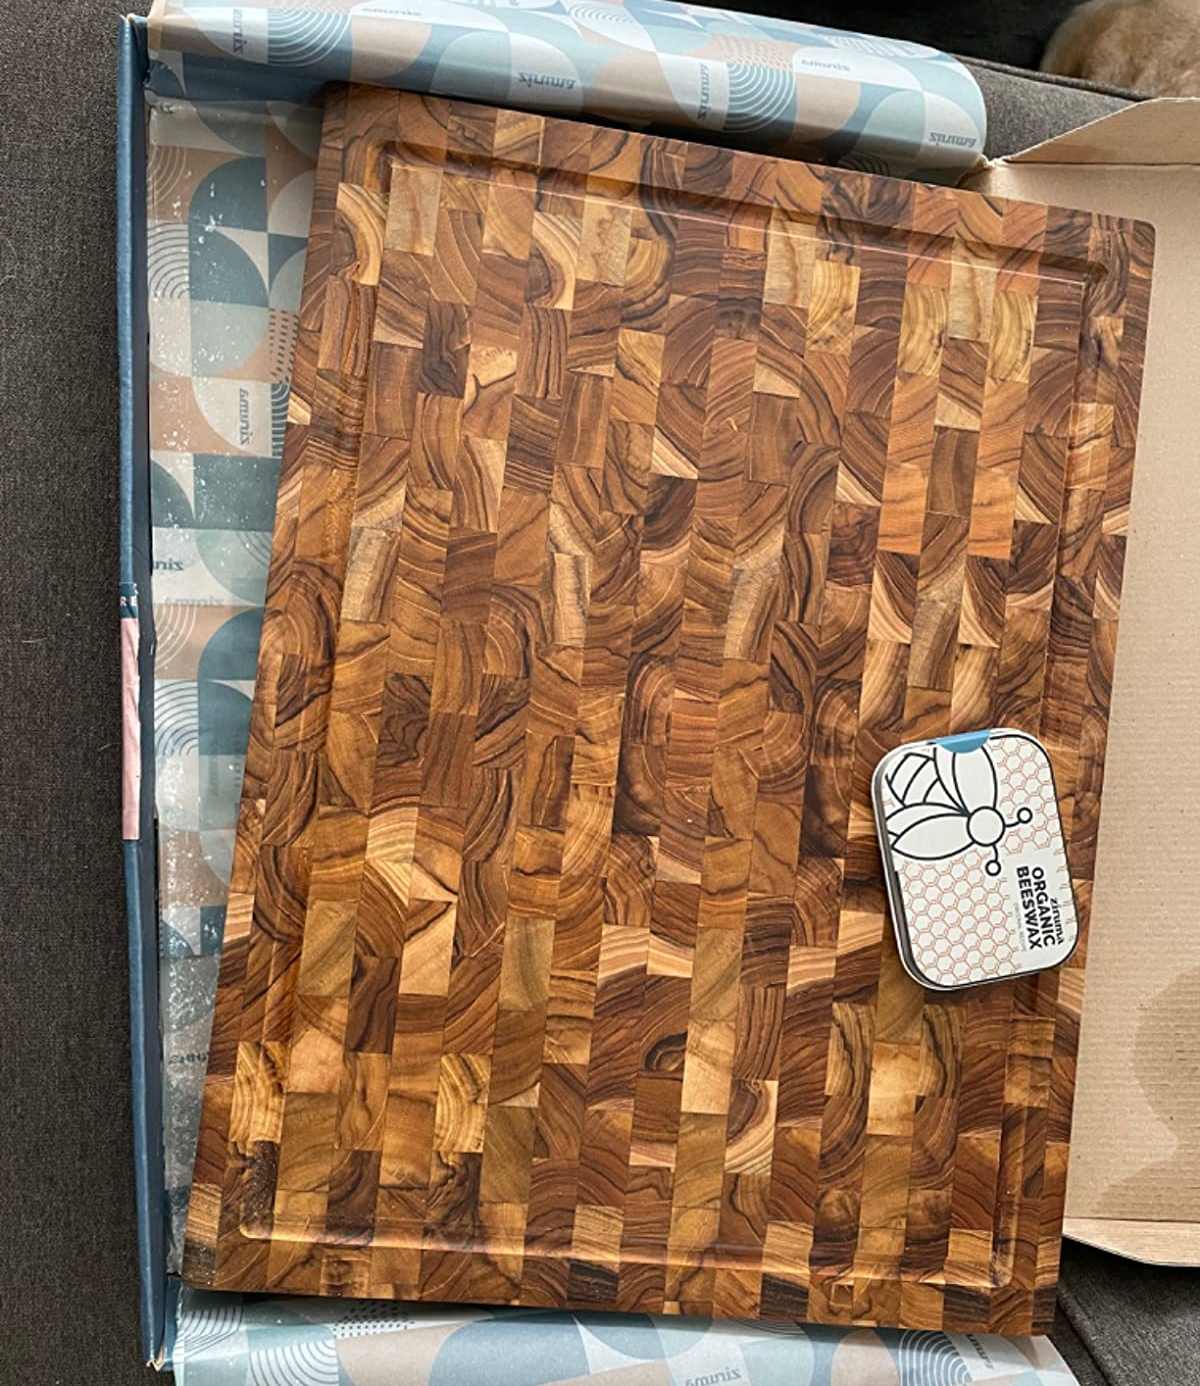 reviewer photo of the cutting board in its box, with a container of wax